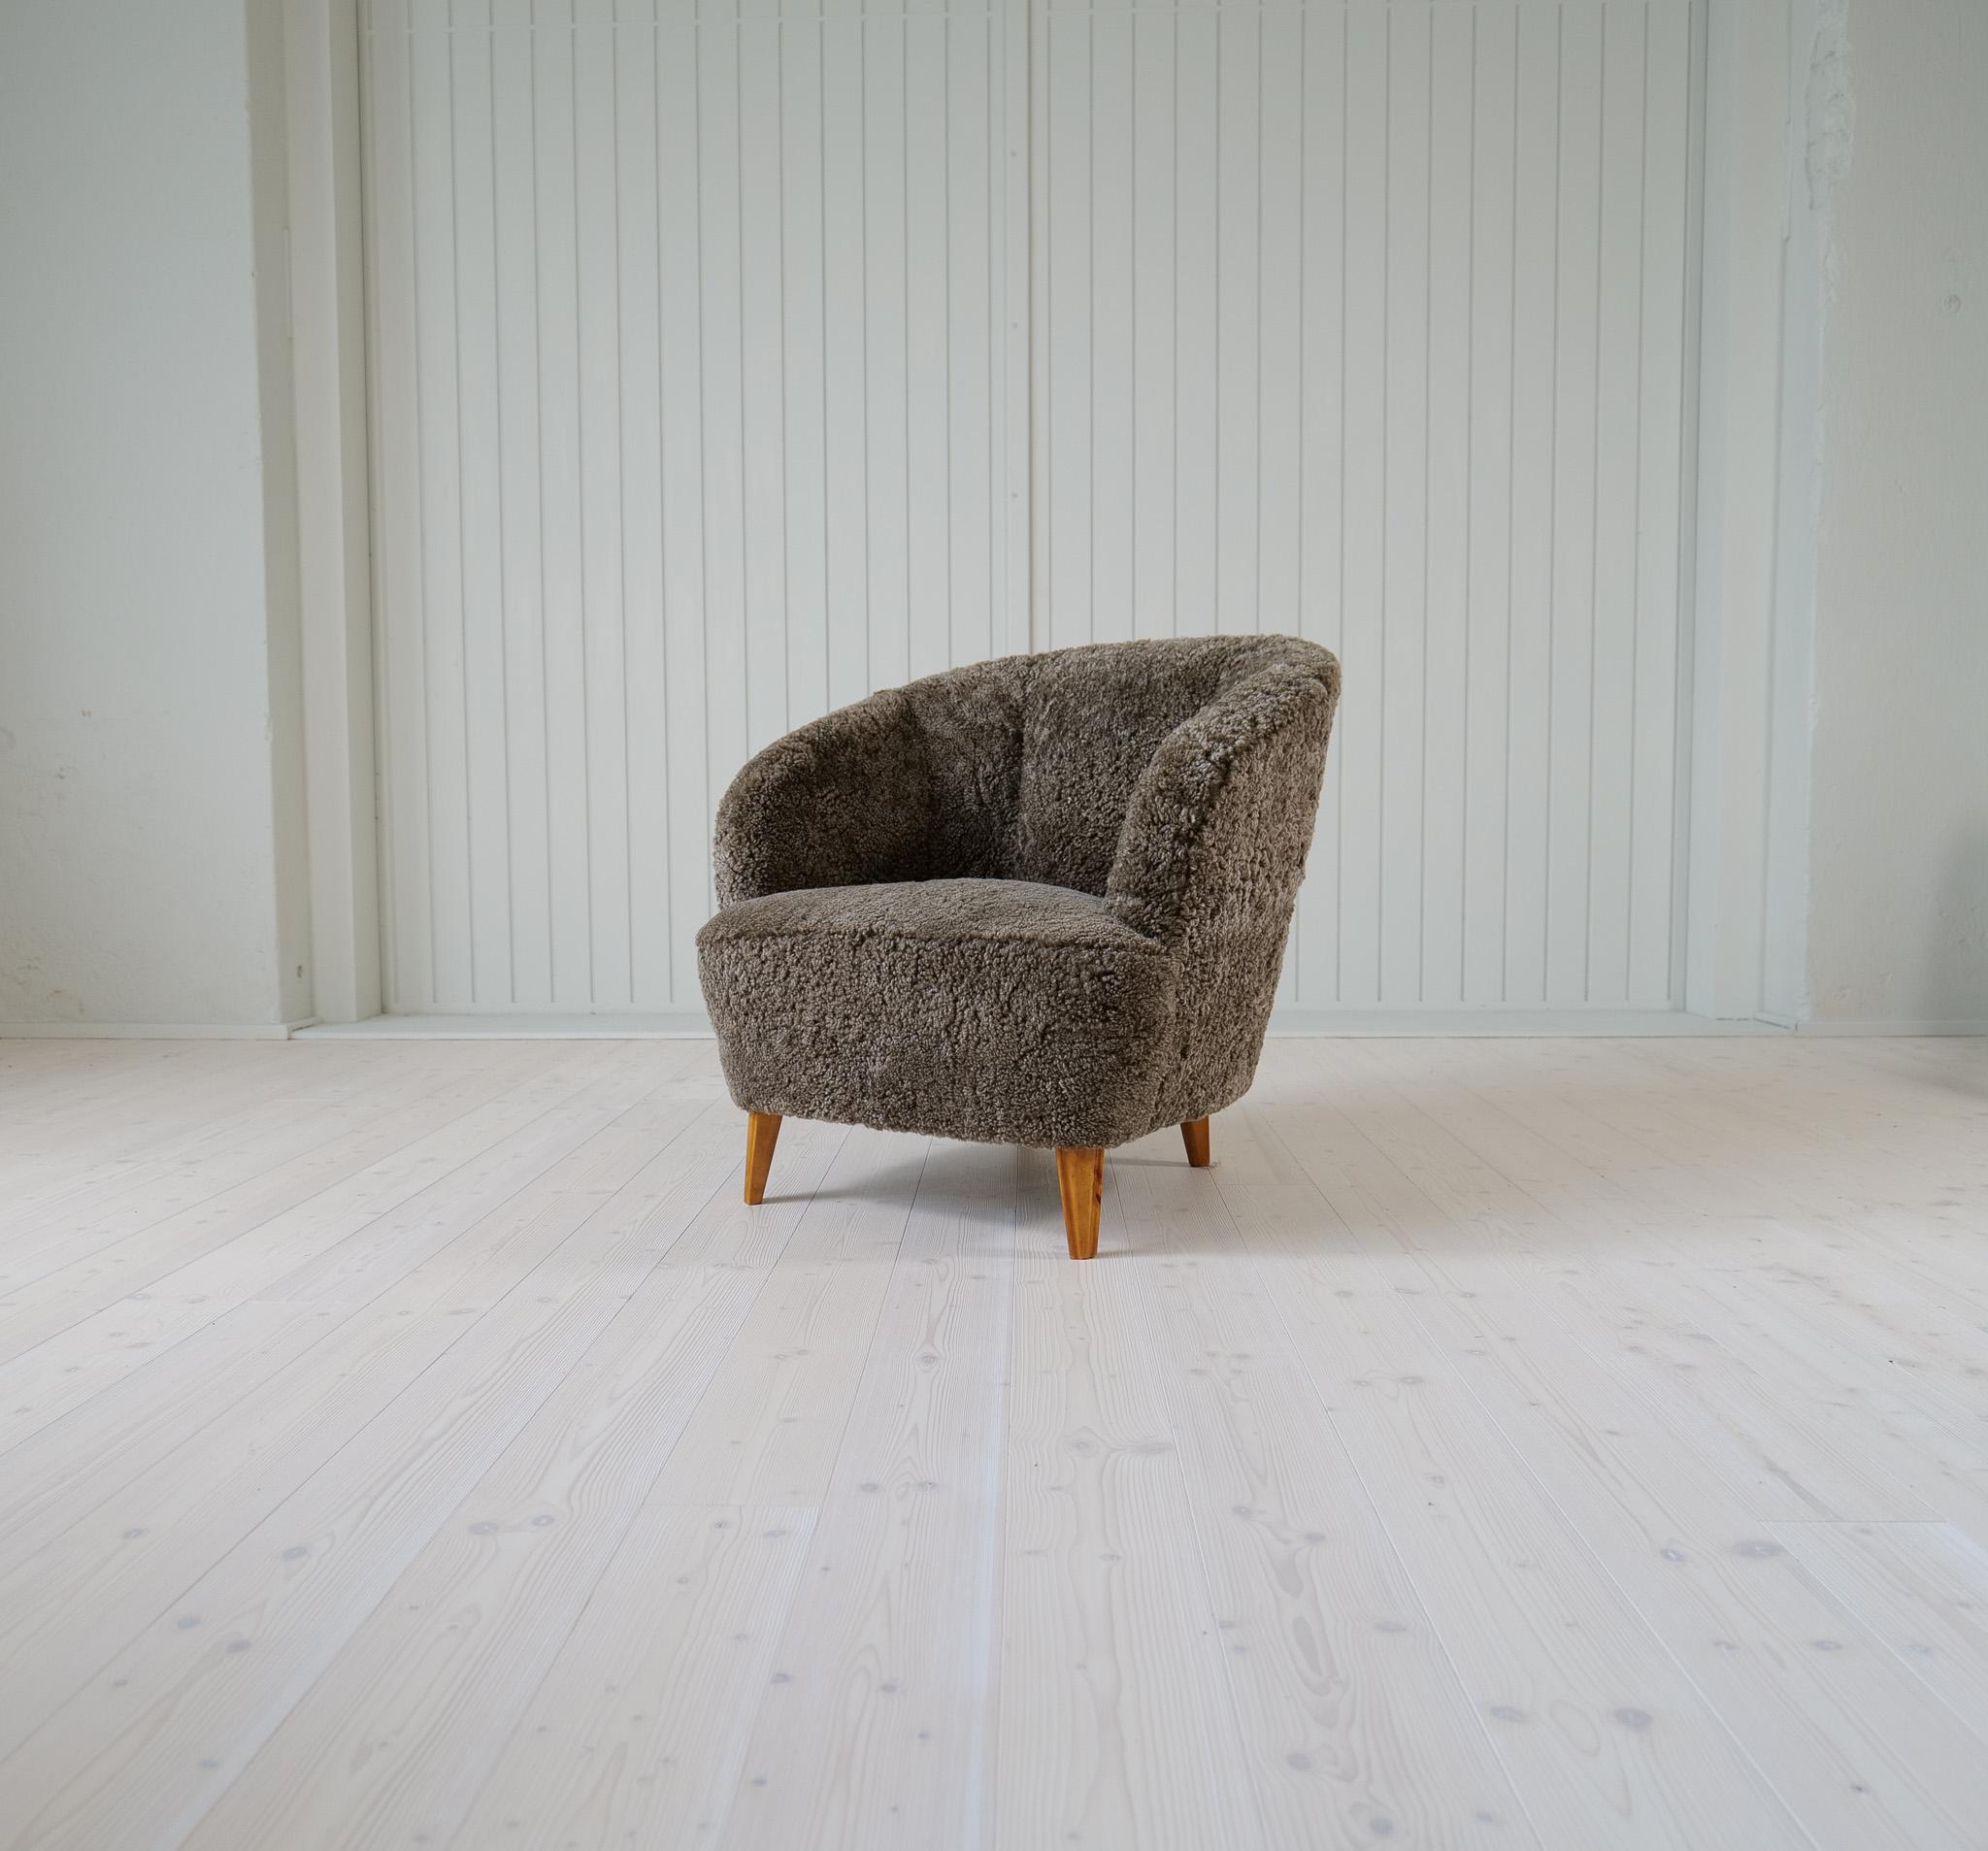 This lounge chair was made in the 1940s Sweden. The curves and structure on this furniture takes you back to the where art deco and midcentury modern are united. The chair has been reupholstered in quality sheepskin that gives those curves even more